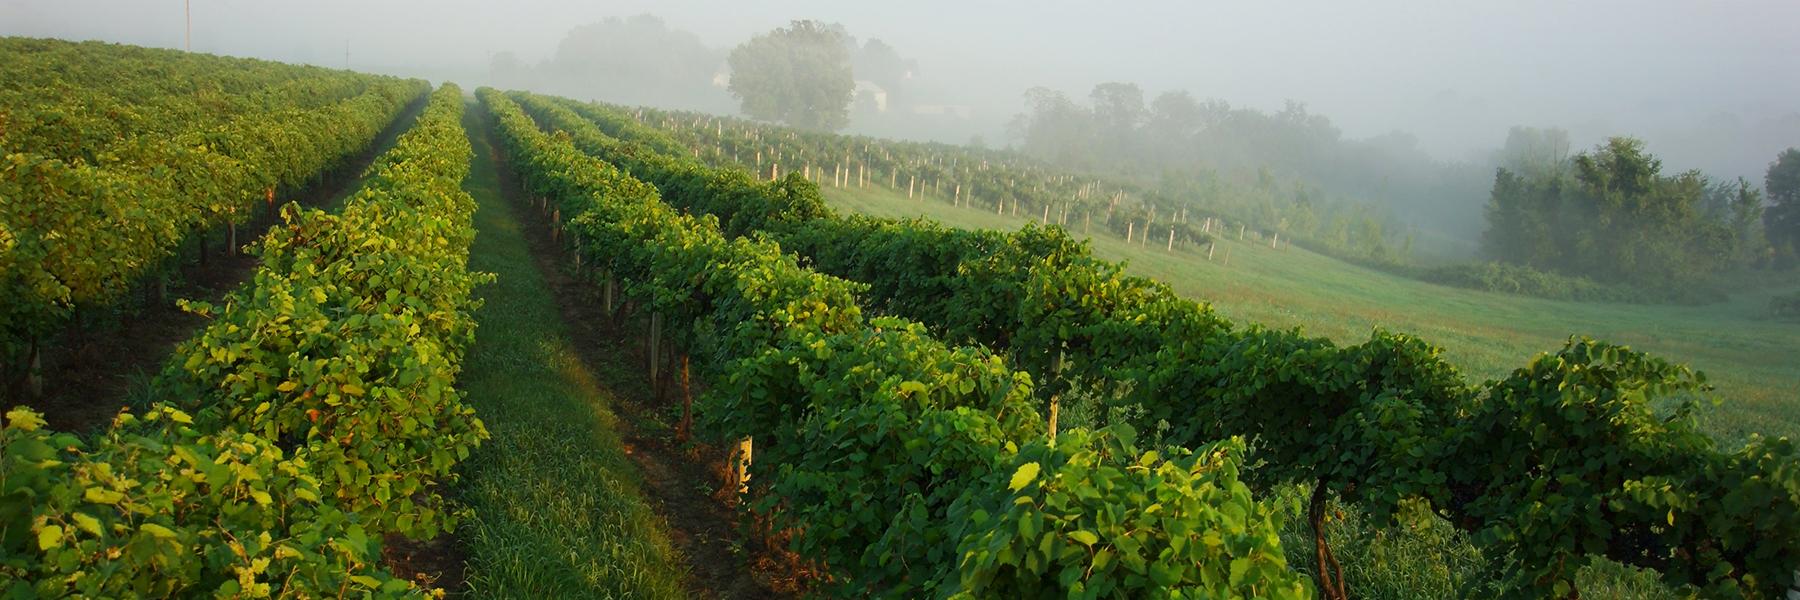 A field of grapes in Missouri Wine Country.